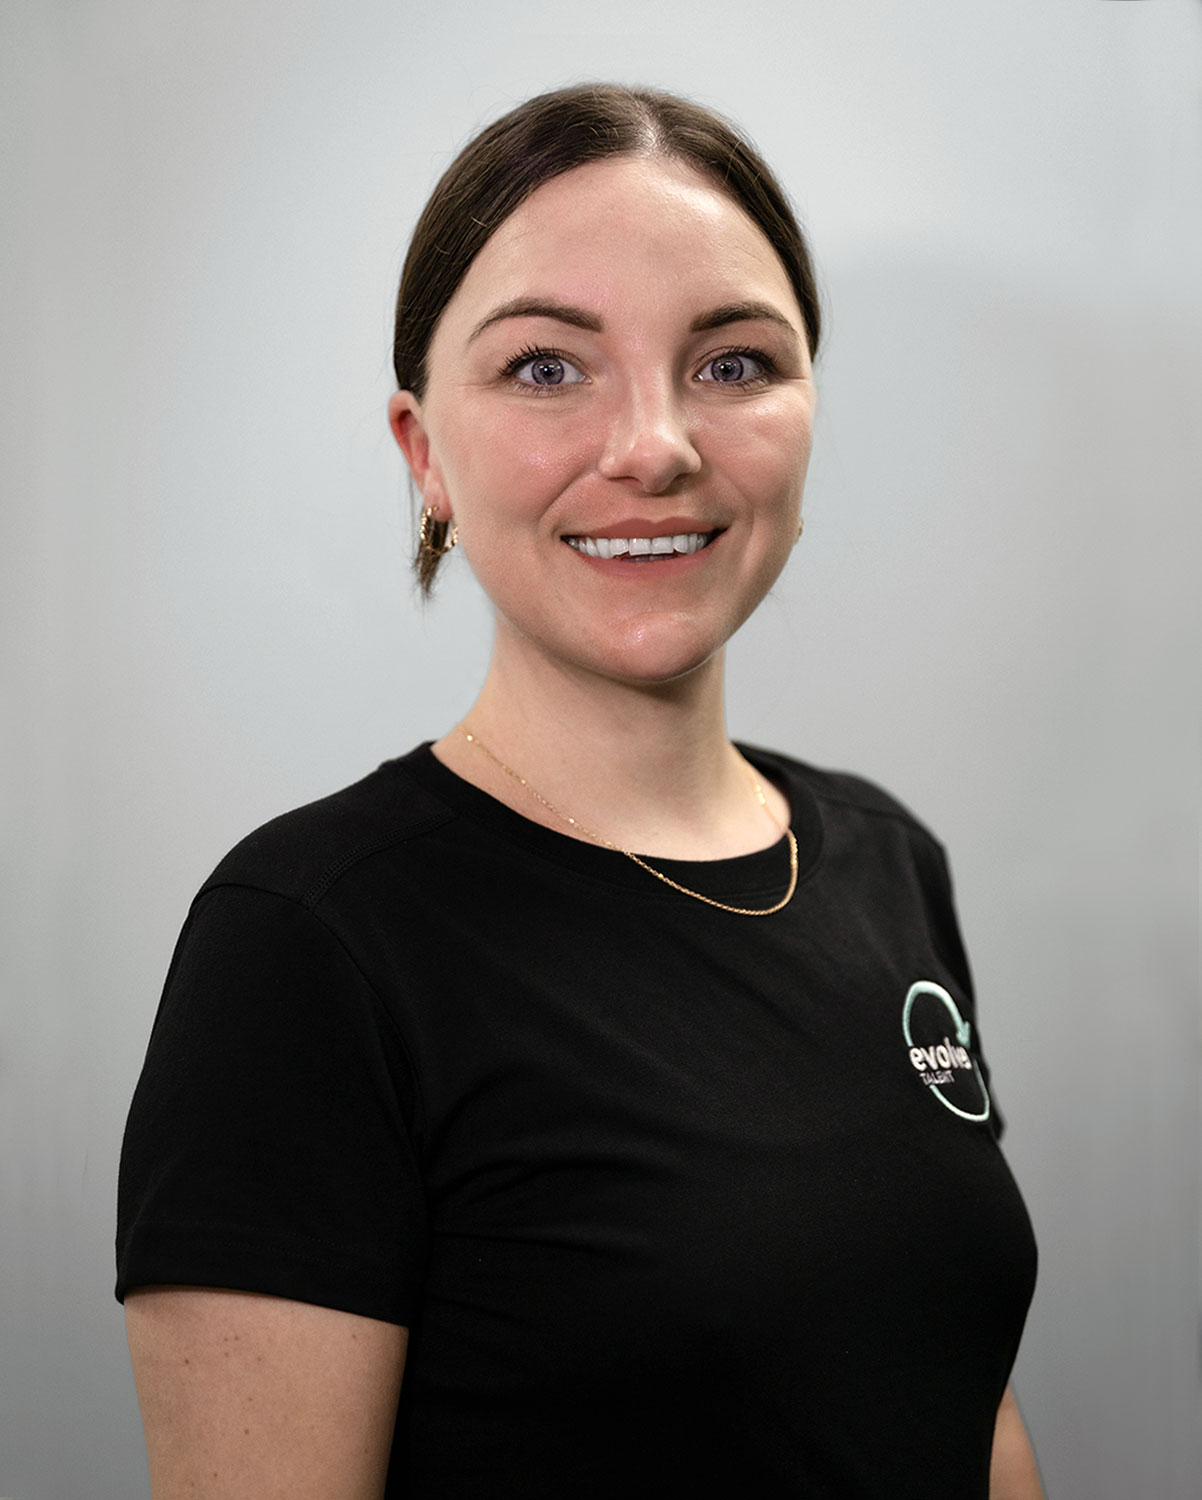 Jessica Dodd, Associate Director of Evolve Healthcare - Allied Health & Wellbeing